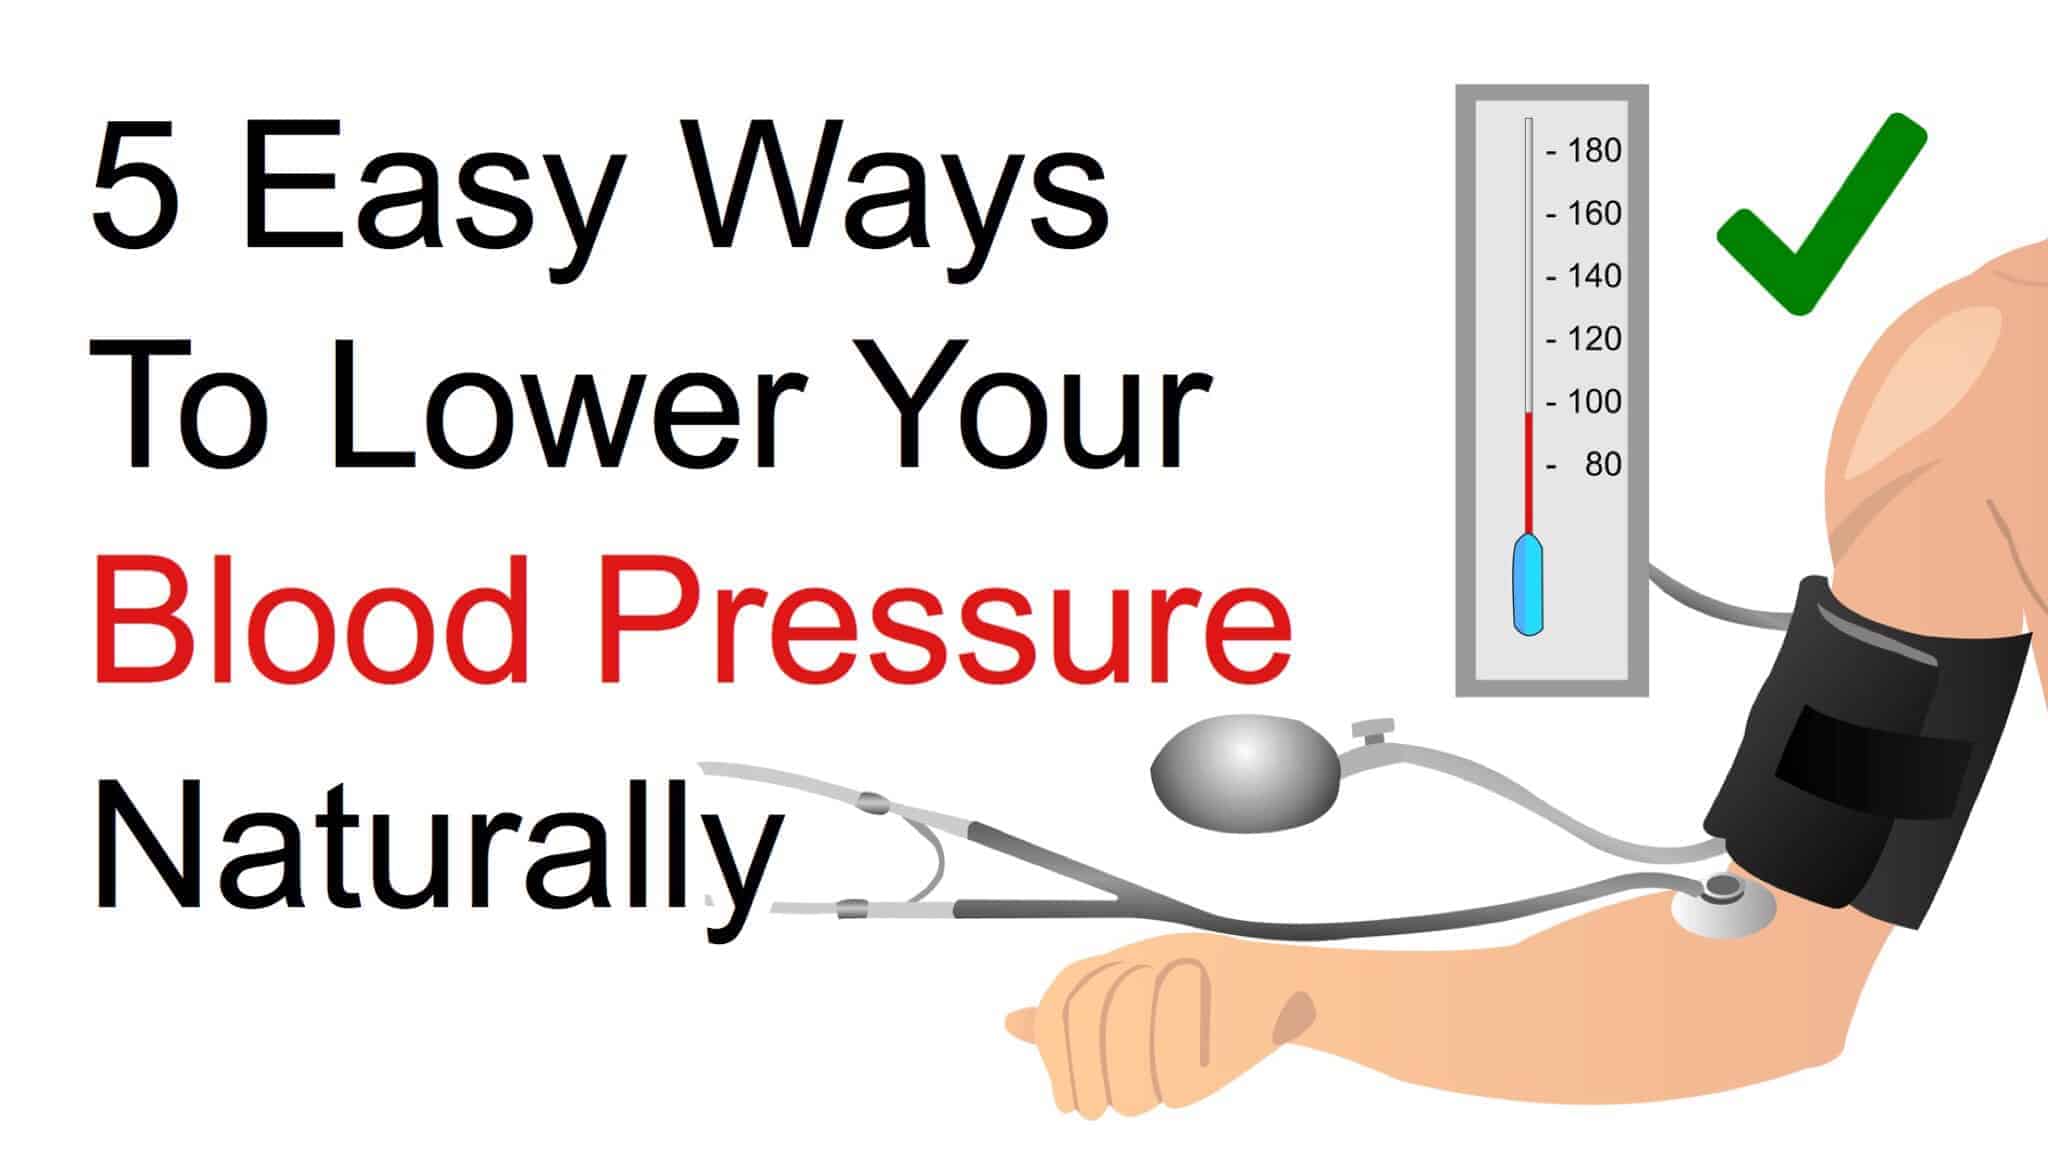 how to lower blood pressure quickly for a physical